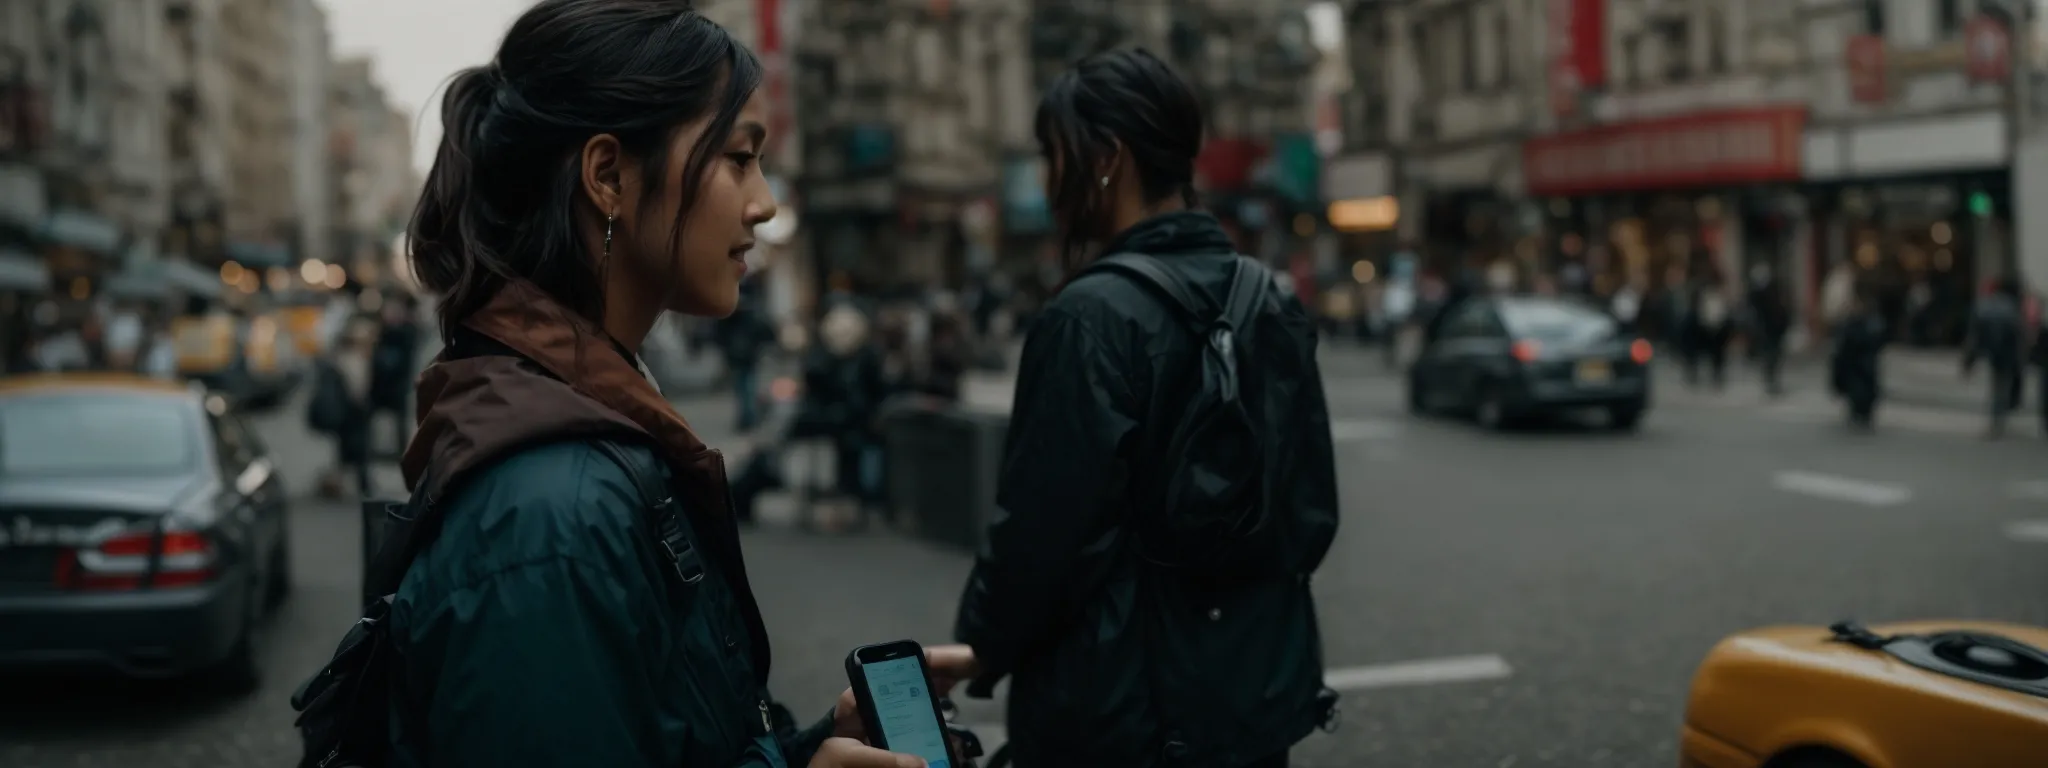 a person speaking into their smartphone, activating a digital assistant on the screen while walking through a bustling city street.